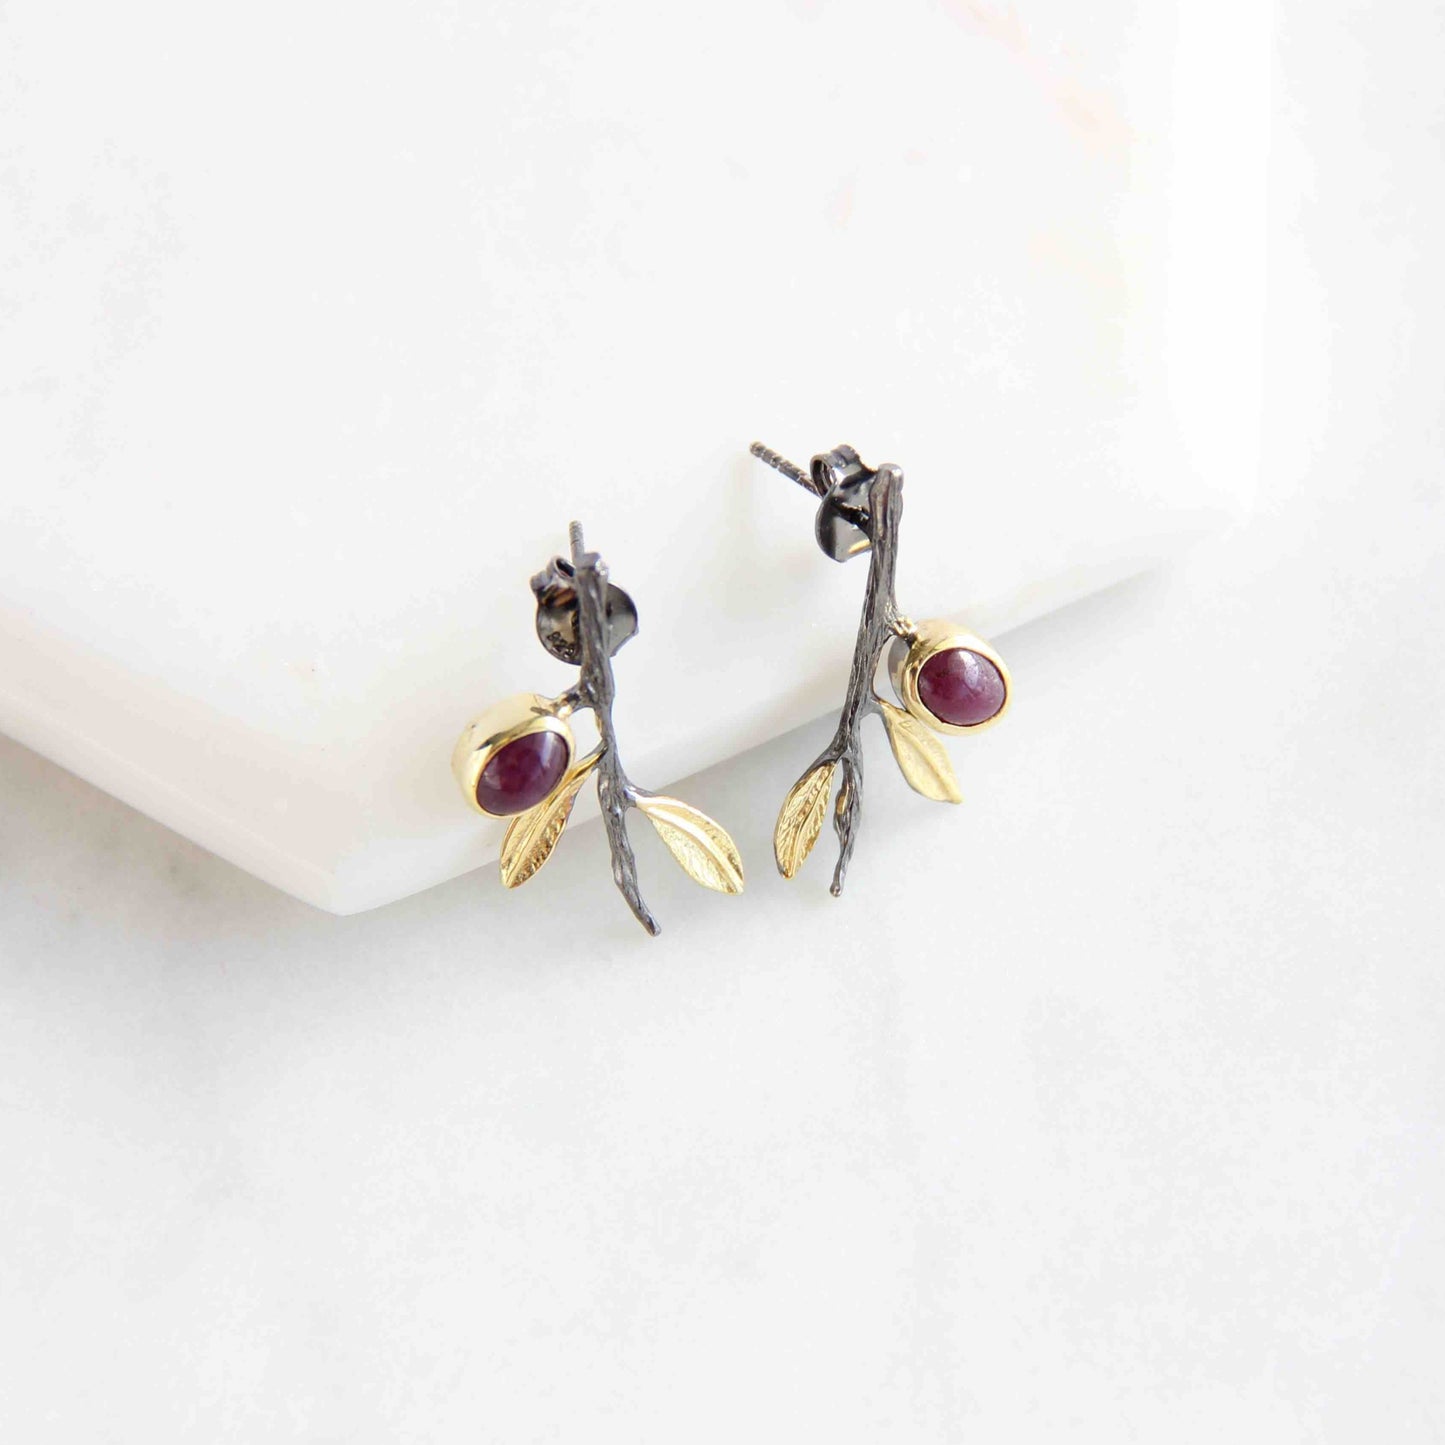 Sterling silver stud earrings with natural Tourmaline gemstone. Tourmaline is the birthstone of October. Handmade Gemstone Jewelry Gift for your loved ones